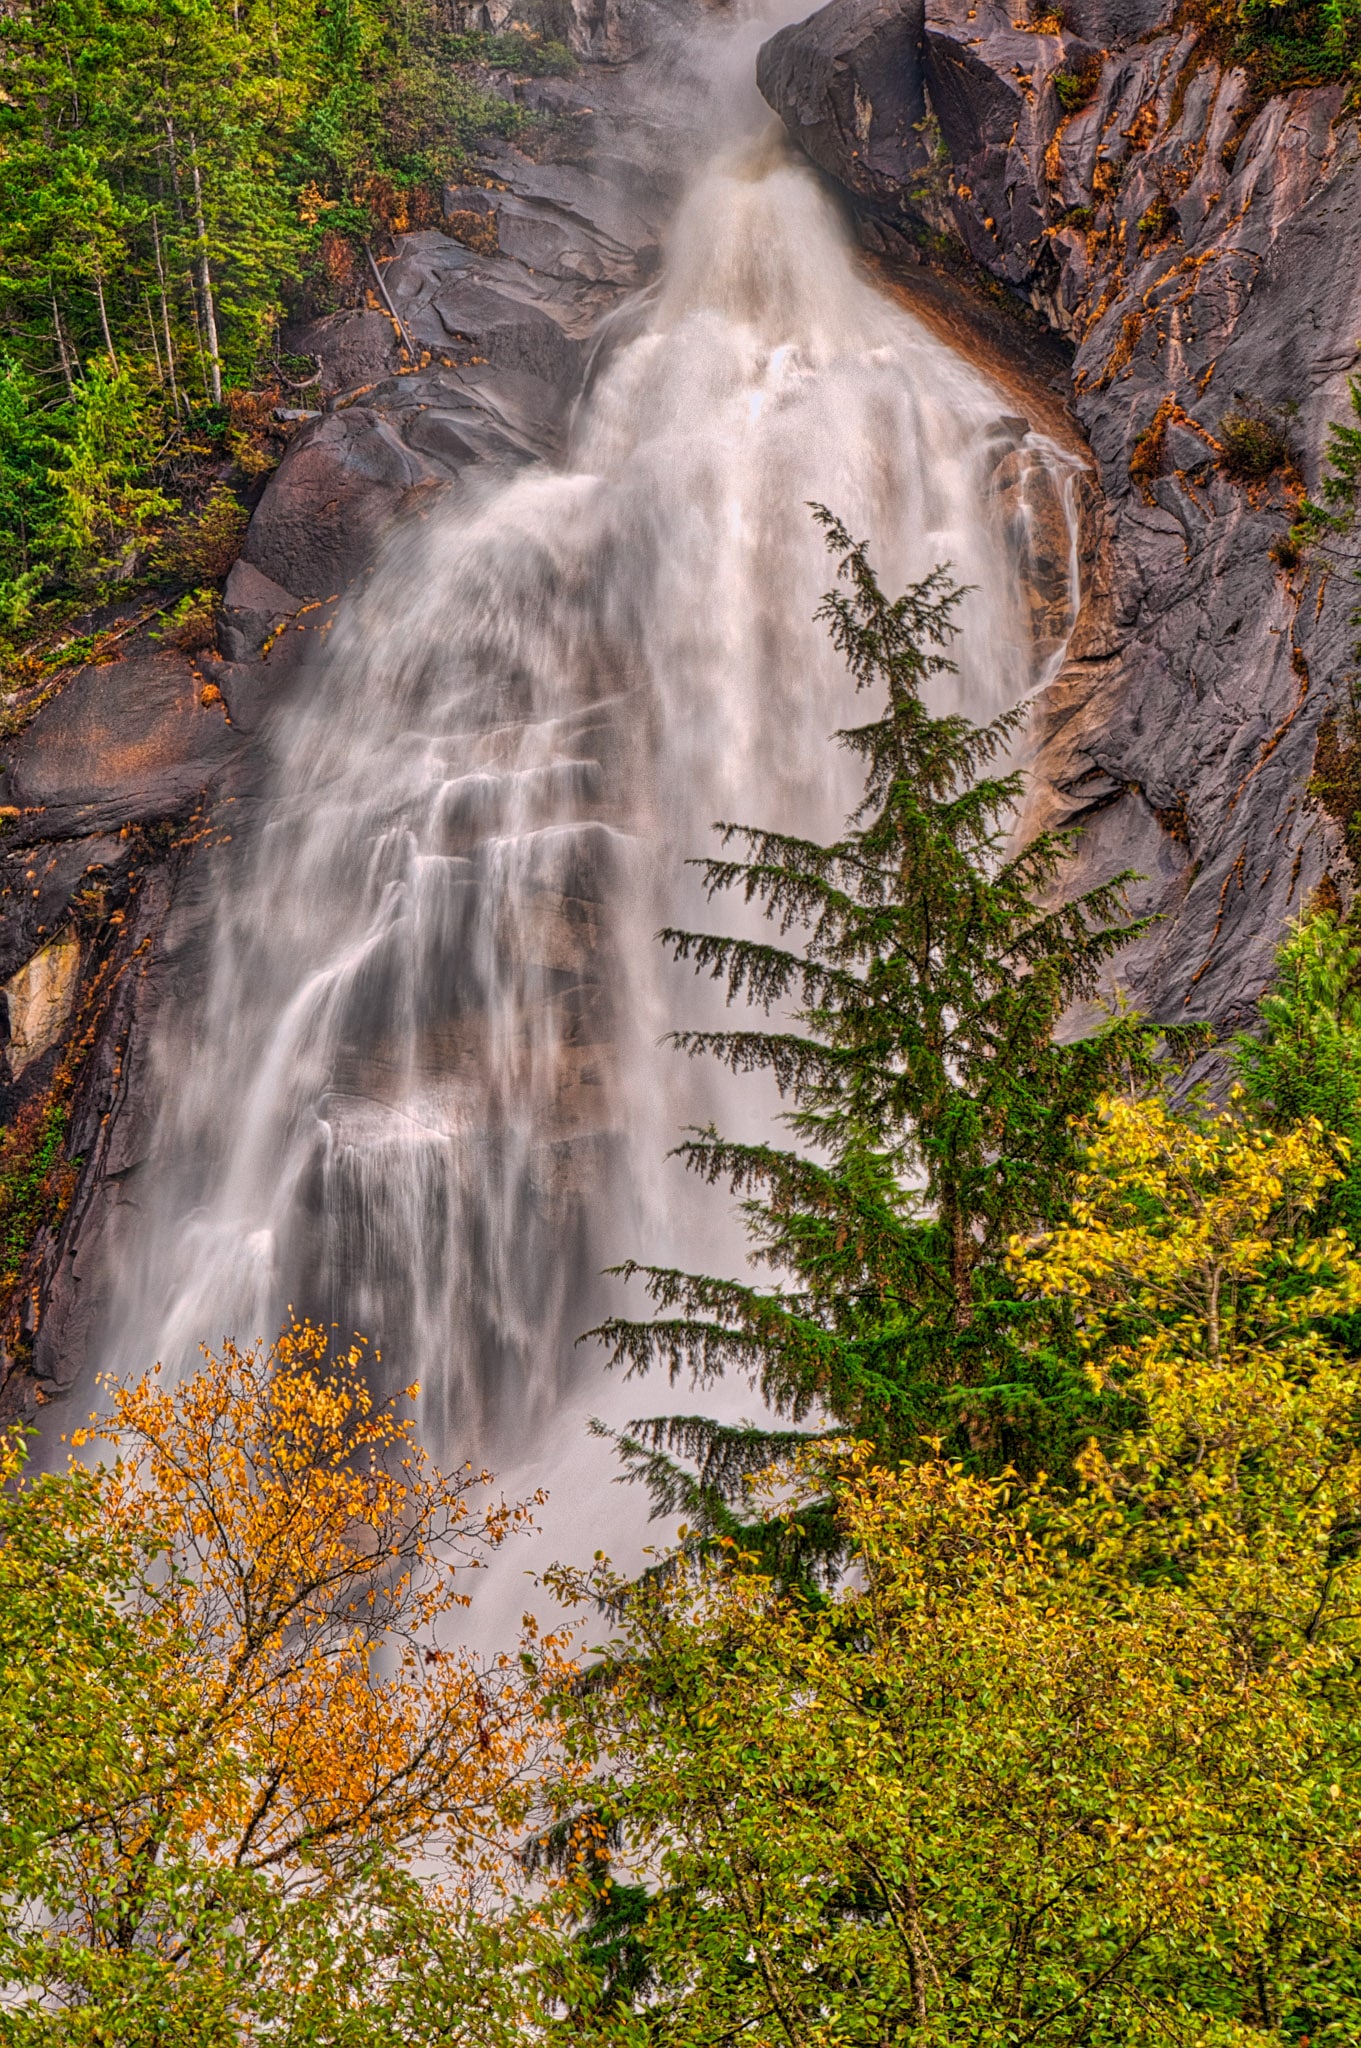 A view of Shannon Falls through a frame of pine trees in Shannon Falls Provincial Park off the Sea-to-sky Highway along the coast of British Columbia.